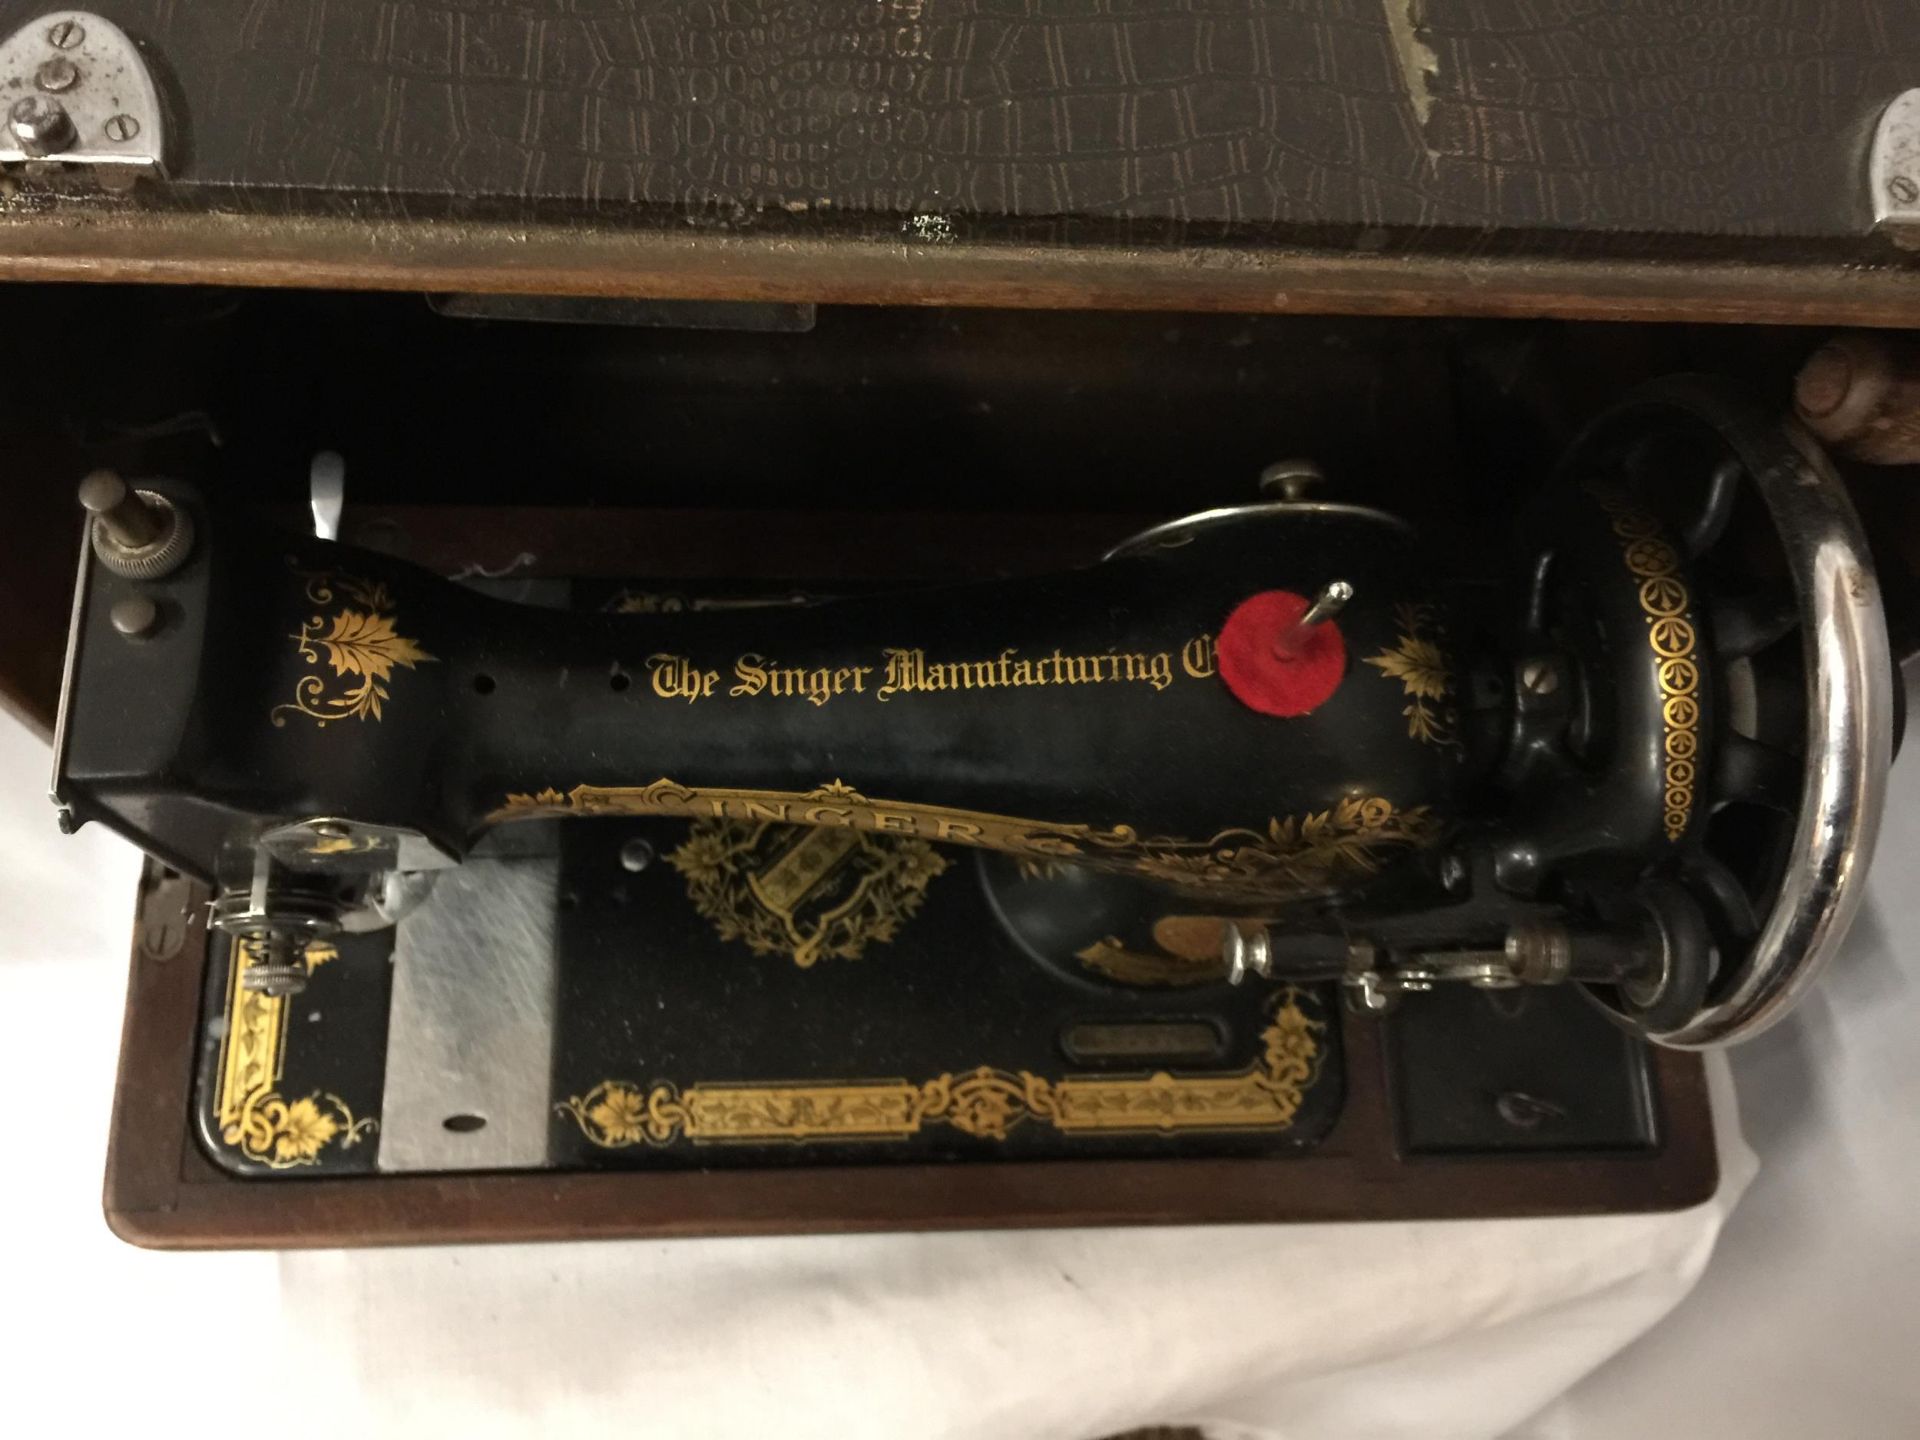 A BOXED VINTAGE SINGER SEWING MACHINE, SERIAL NUMBER EC625798 (WITH FRONT COVER) - Image 4 of 4